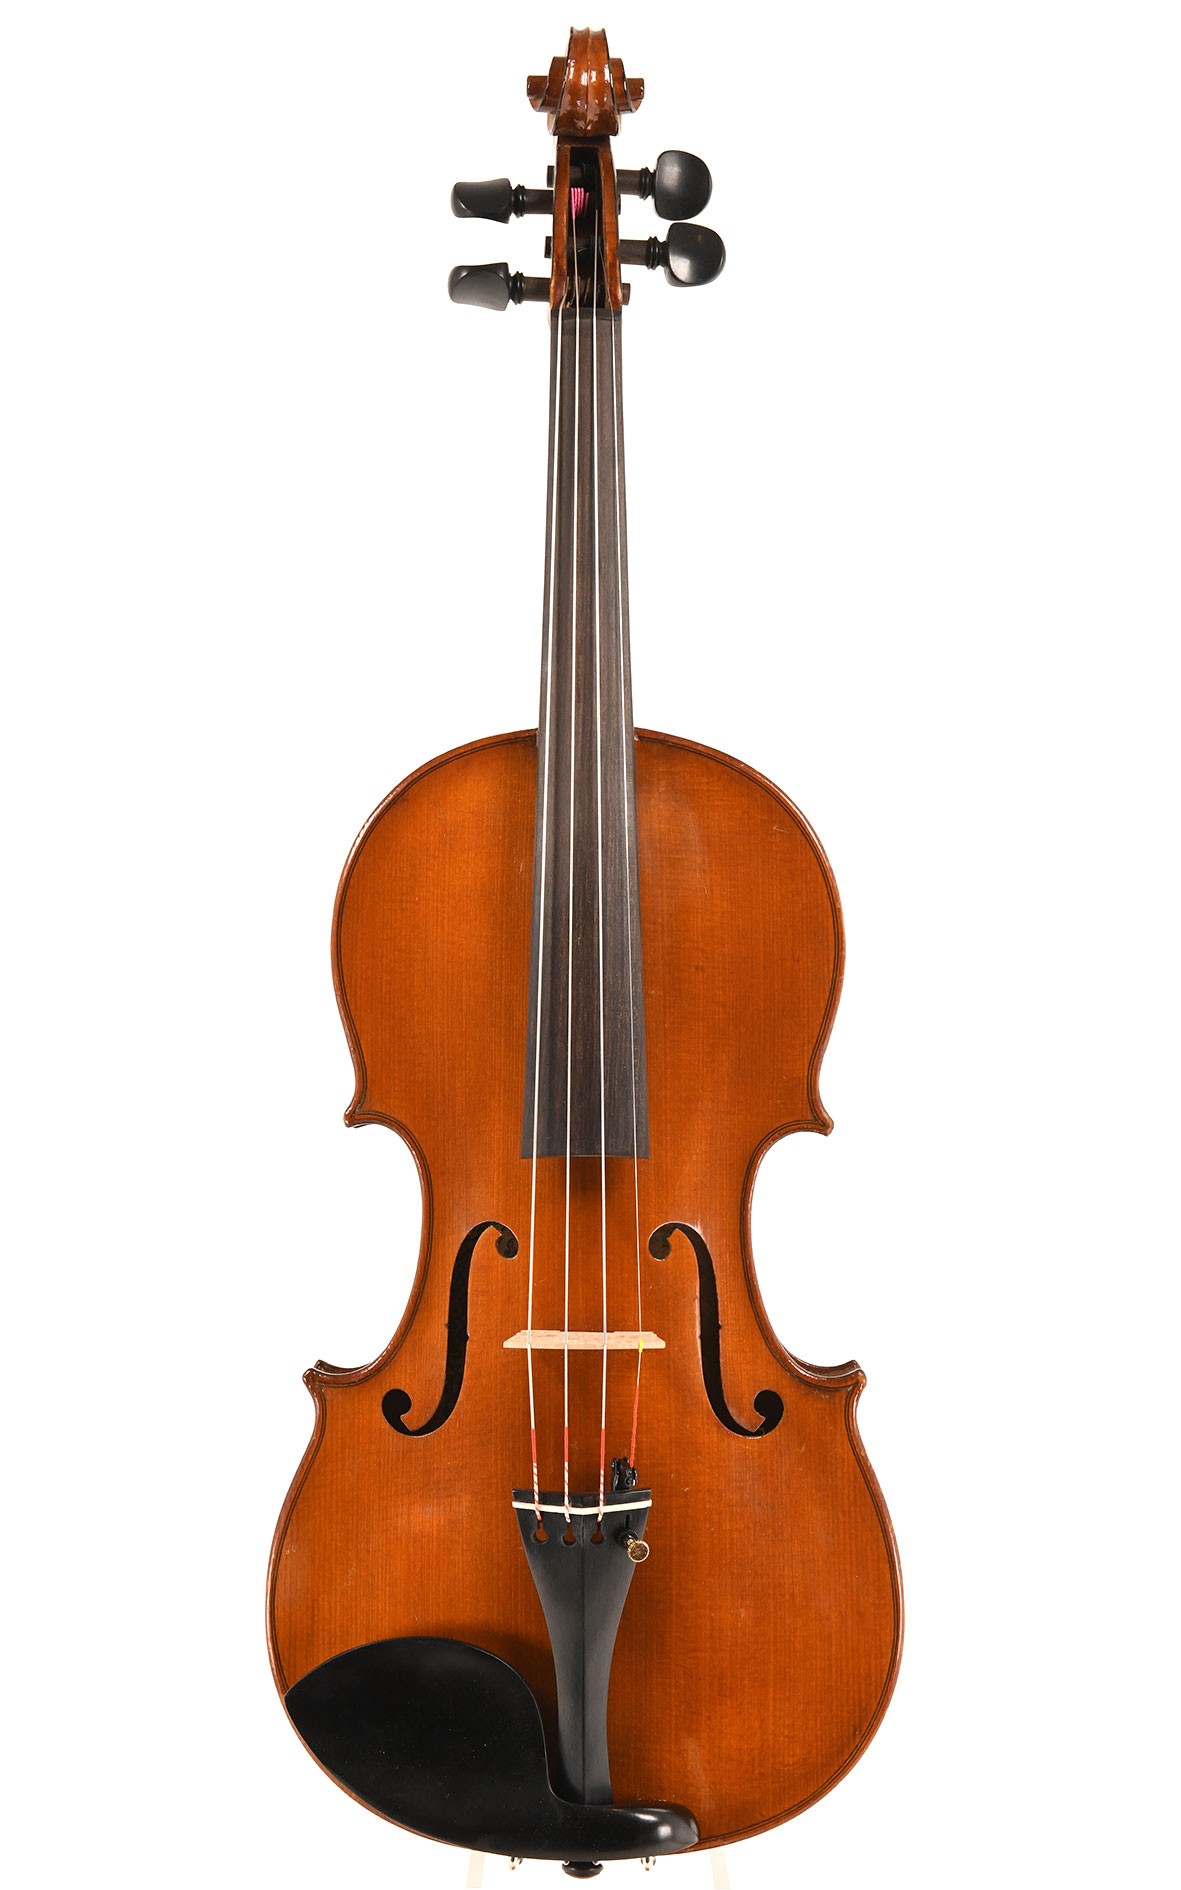 H. Clotelle / Violin after Amati by Laberte-Humbert Frères